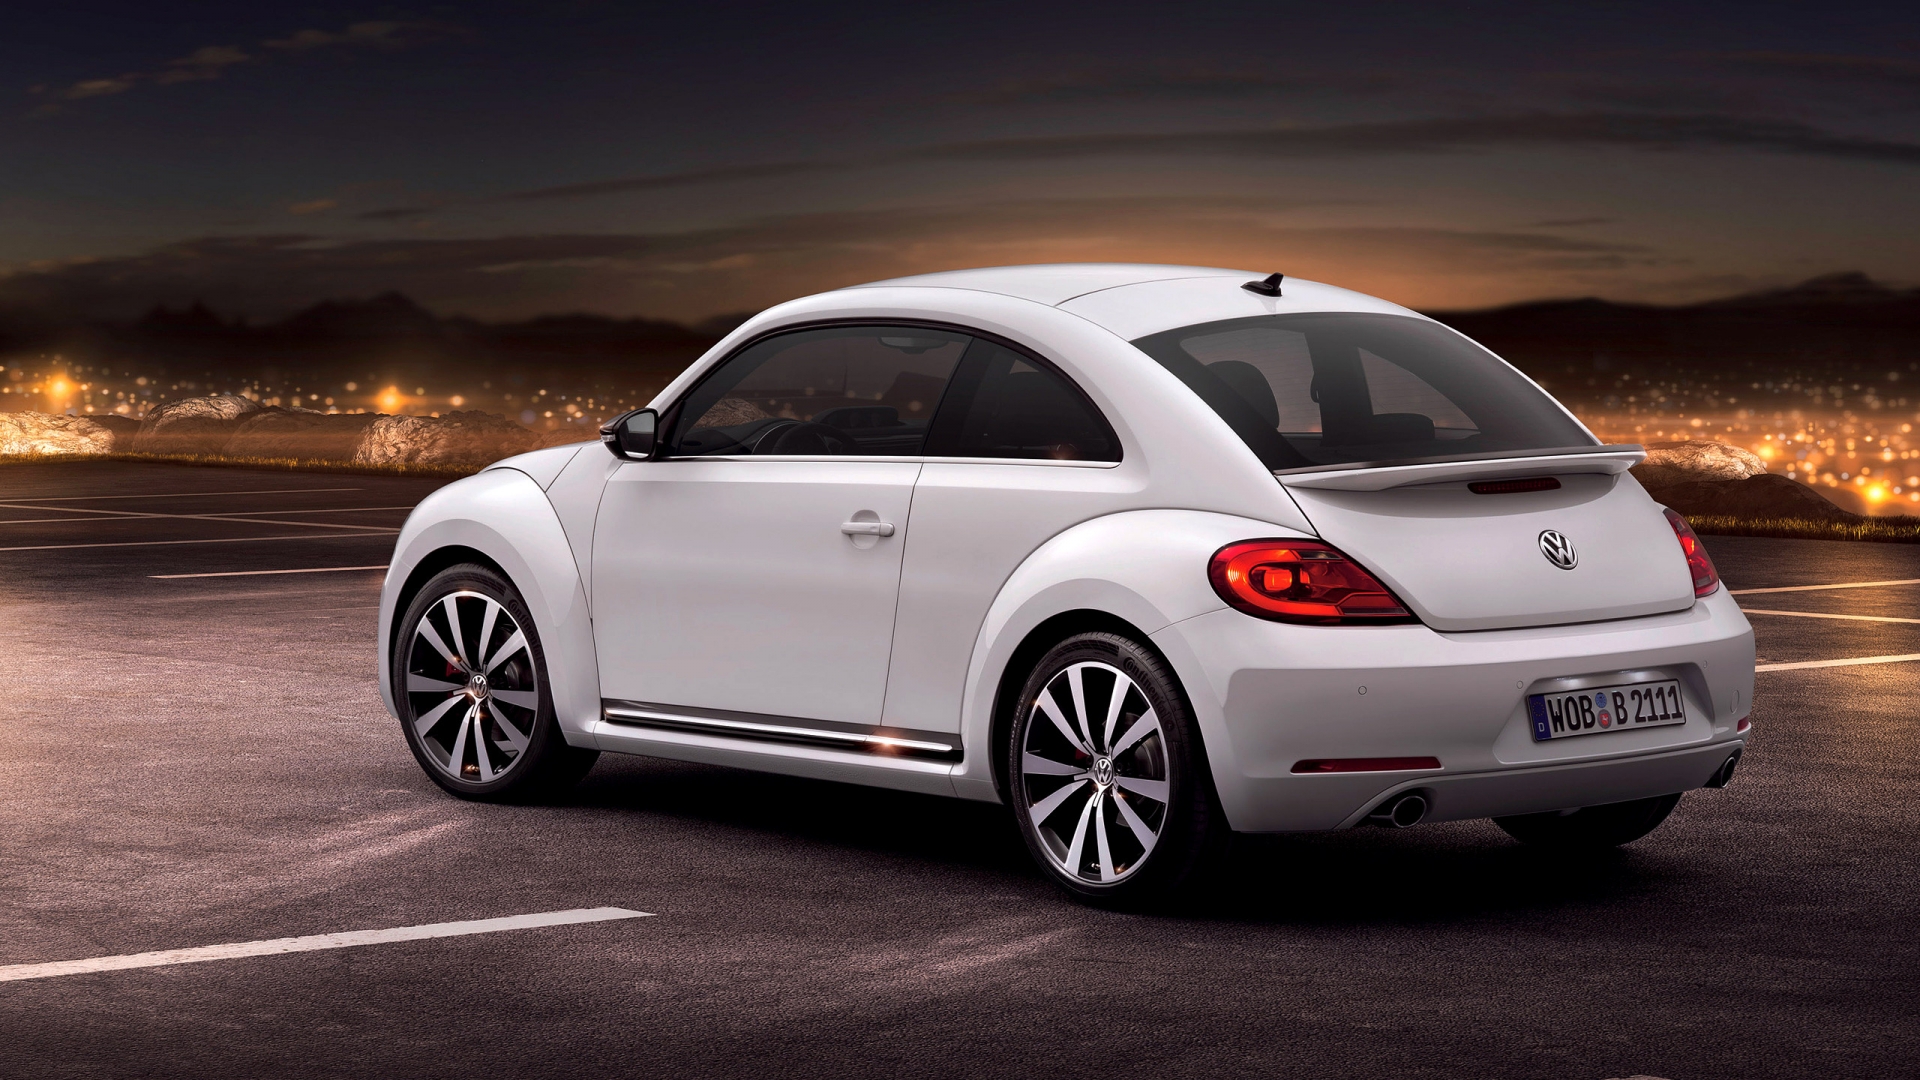 2012 VW Beetle for 1920 x 1080 HDTV 1080p resolution